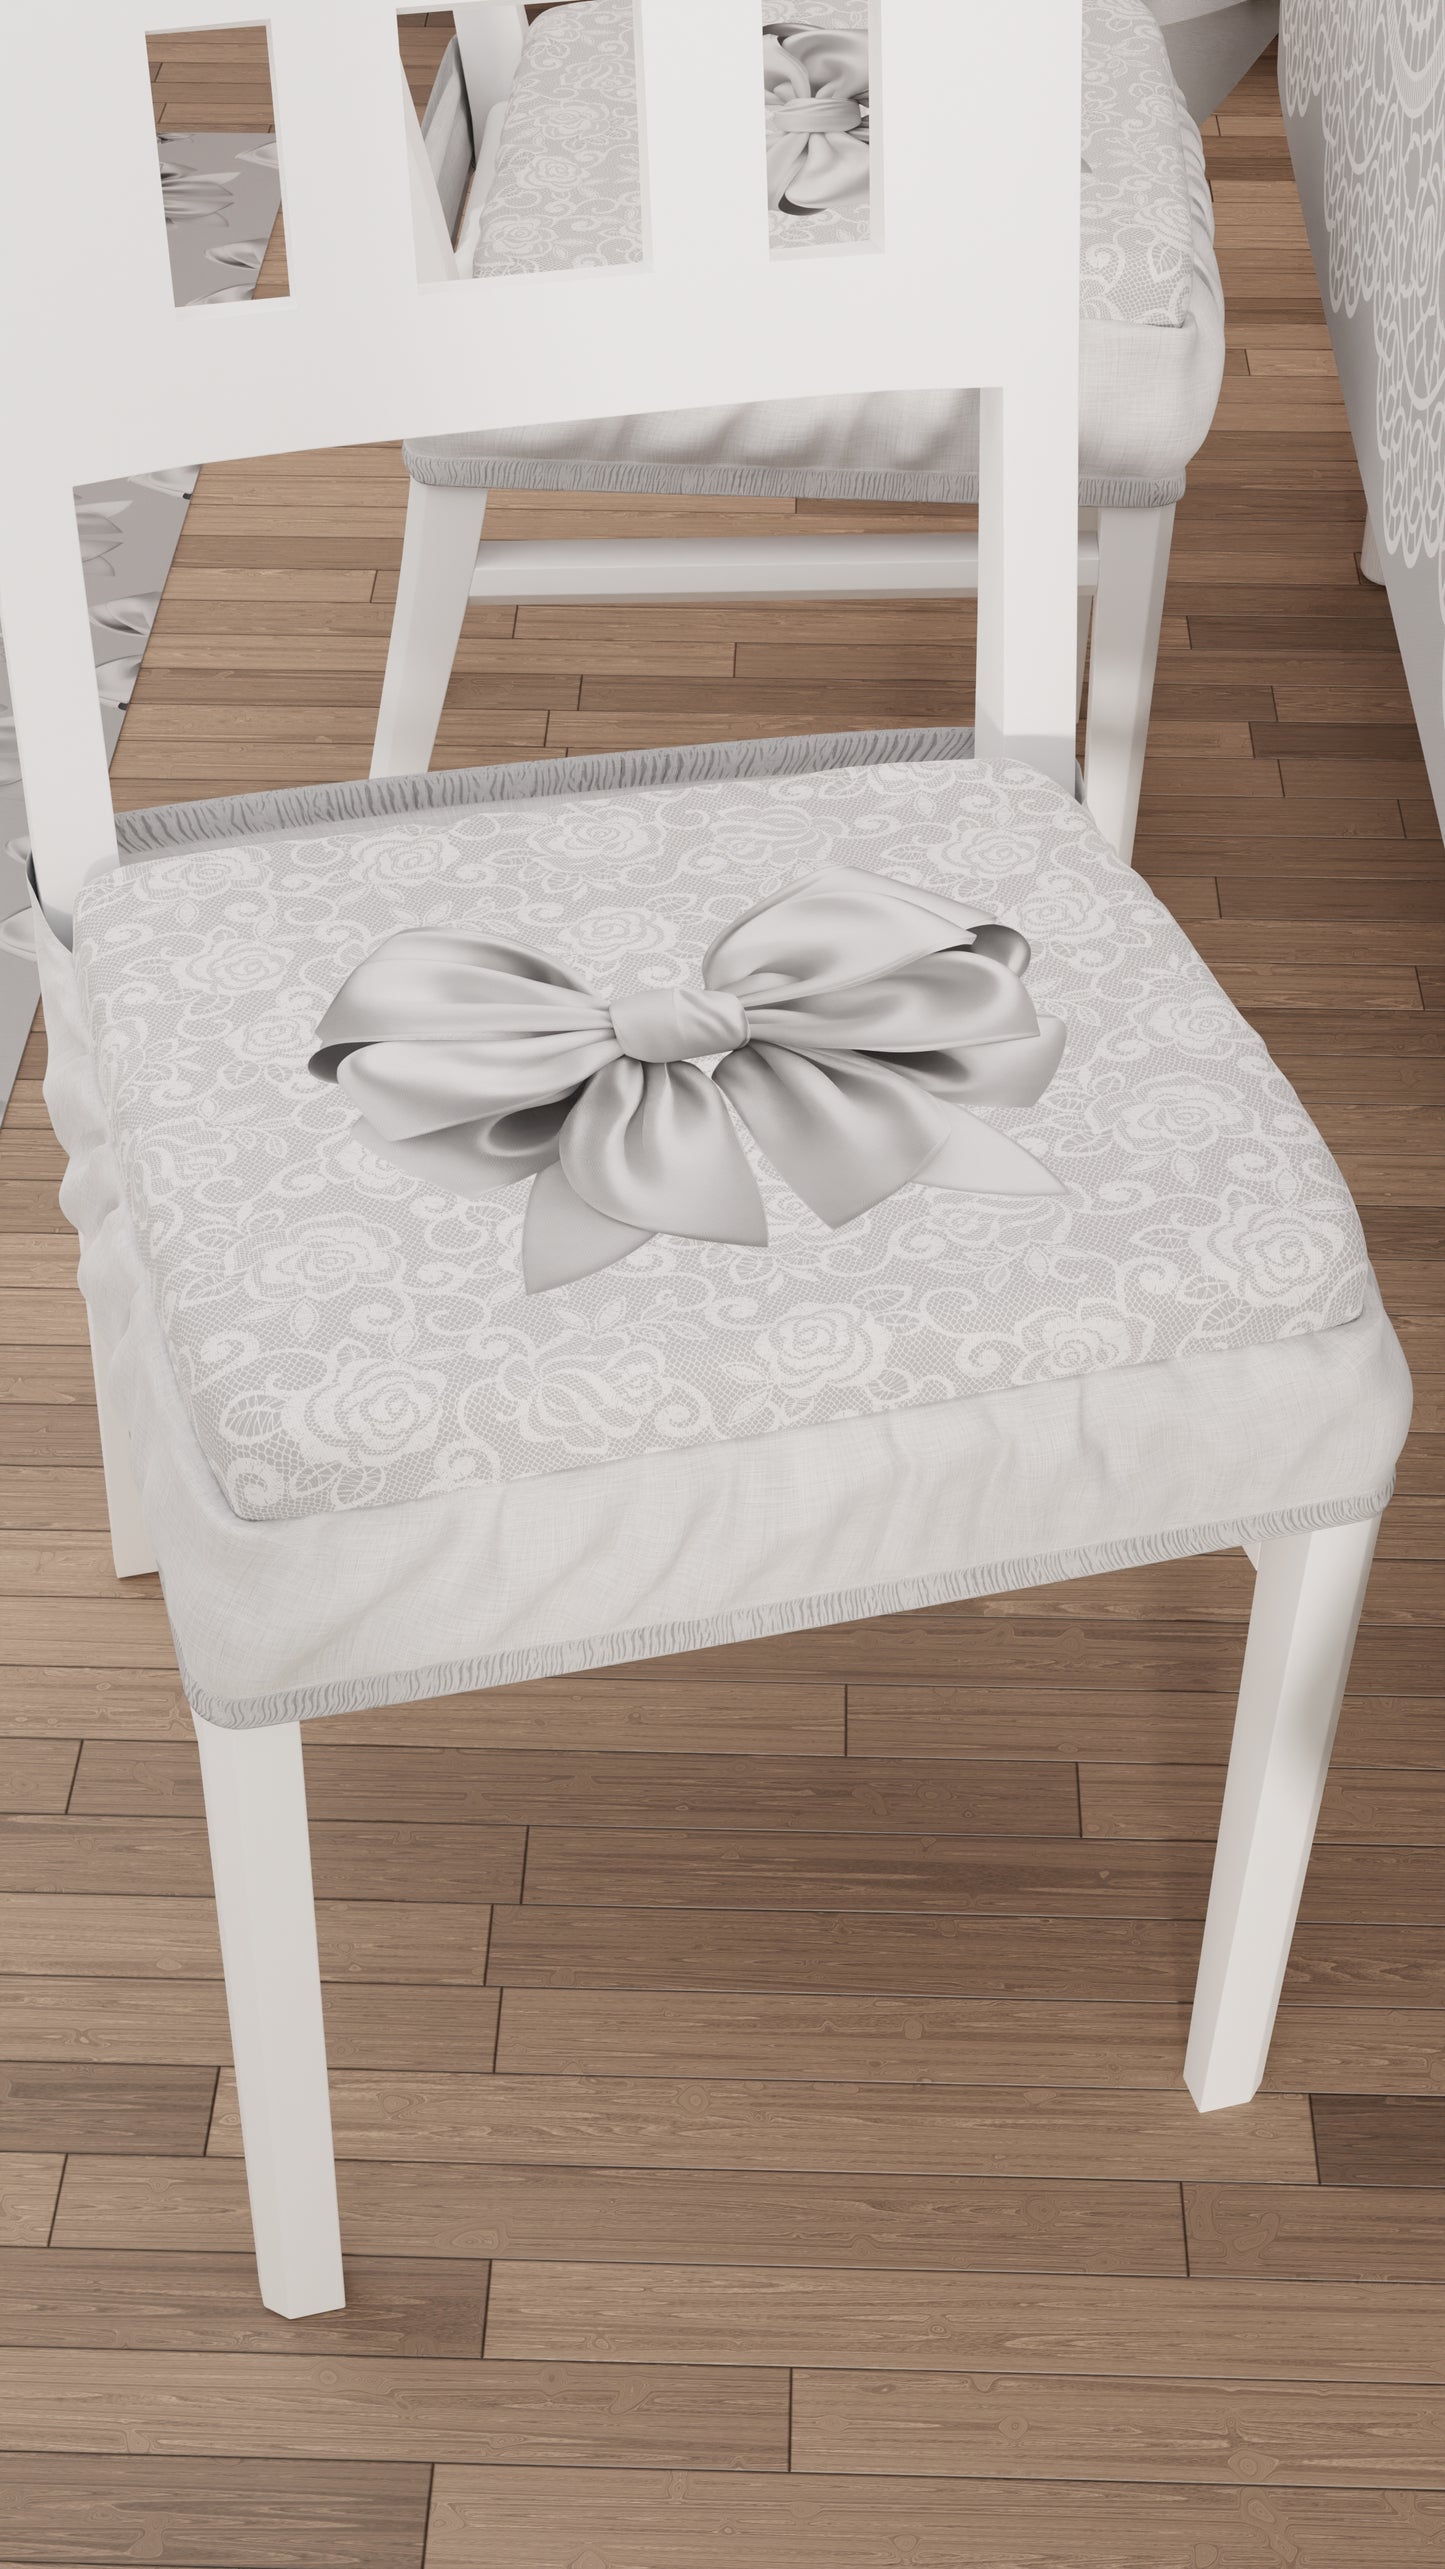 Chair Cushions with Elastic Digital Print Chair Cover 2 Pieces Gray Bow